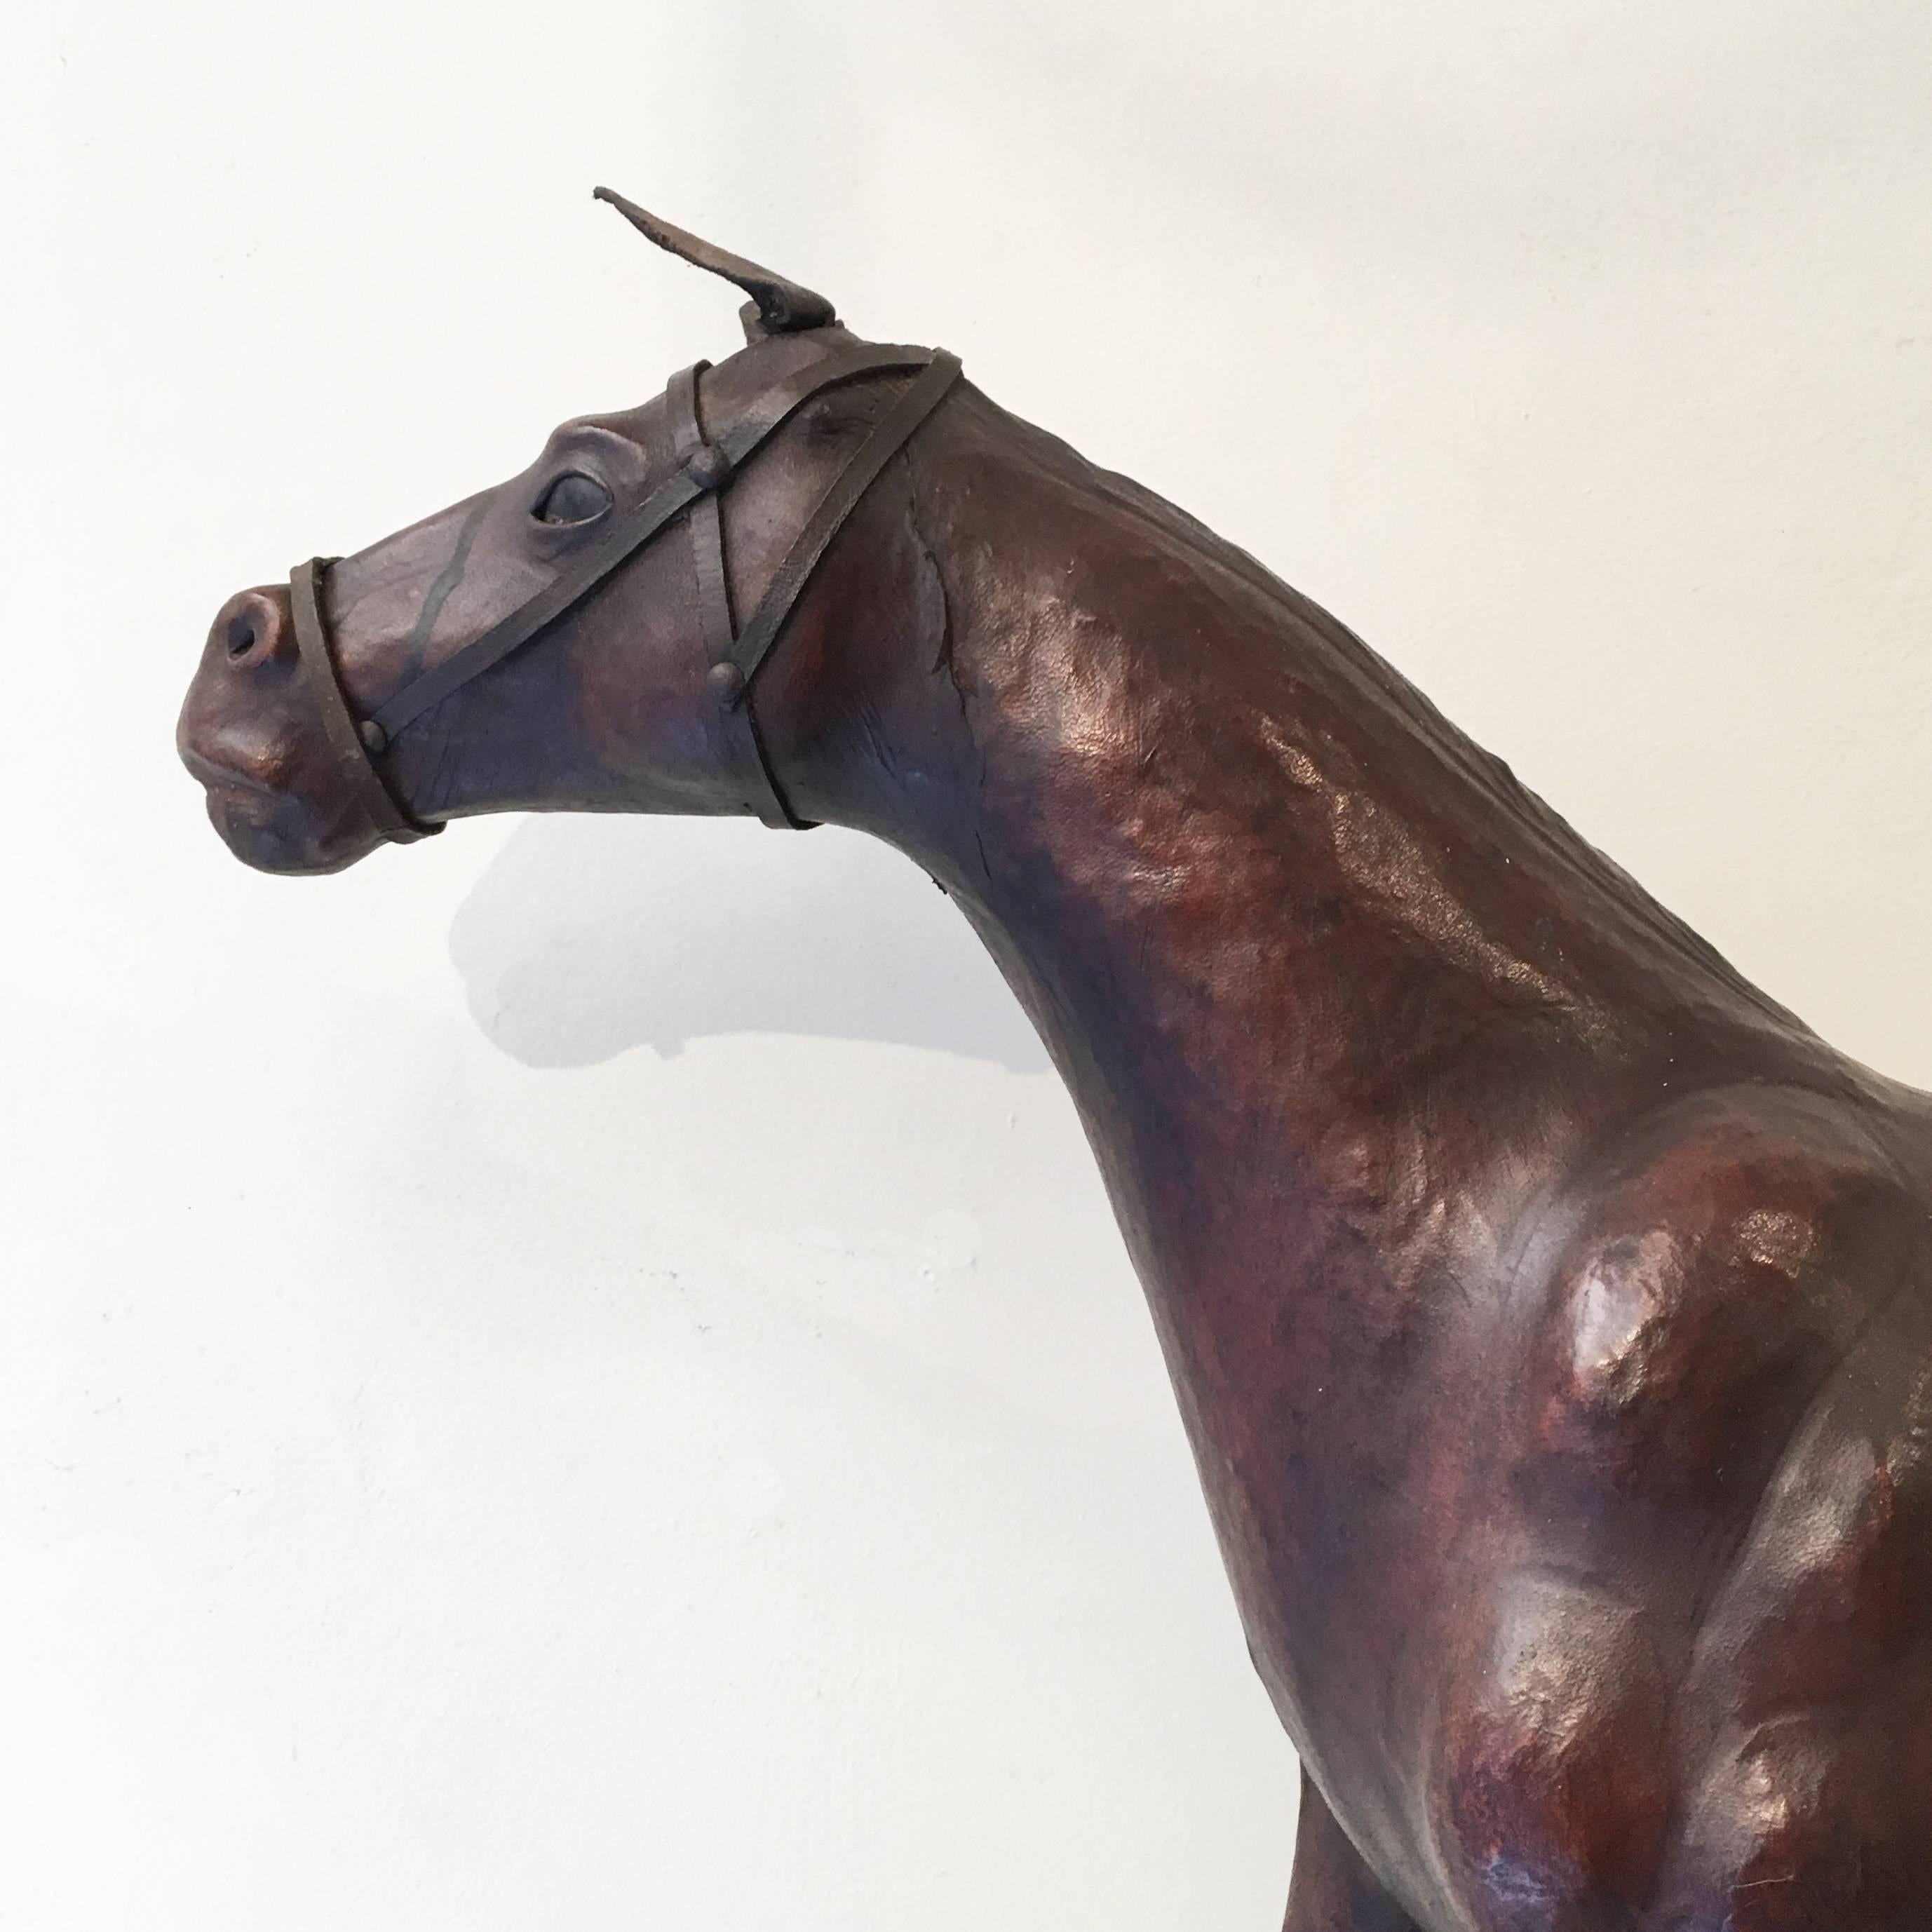 A charming French leather full body horse sculpture or model.
A rectangular base in ebonized wood is surmounted by the statue.
French manufactory, late 19th century.